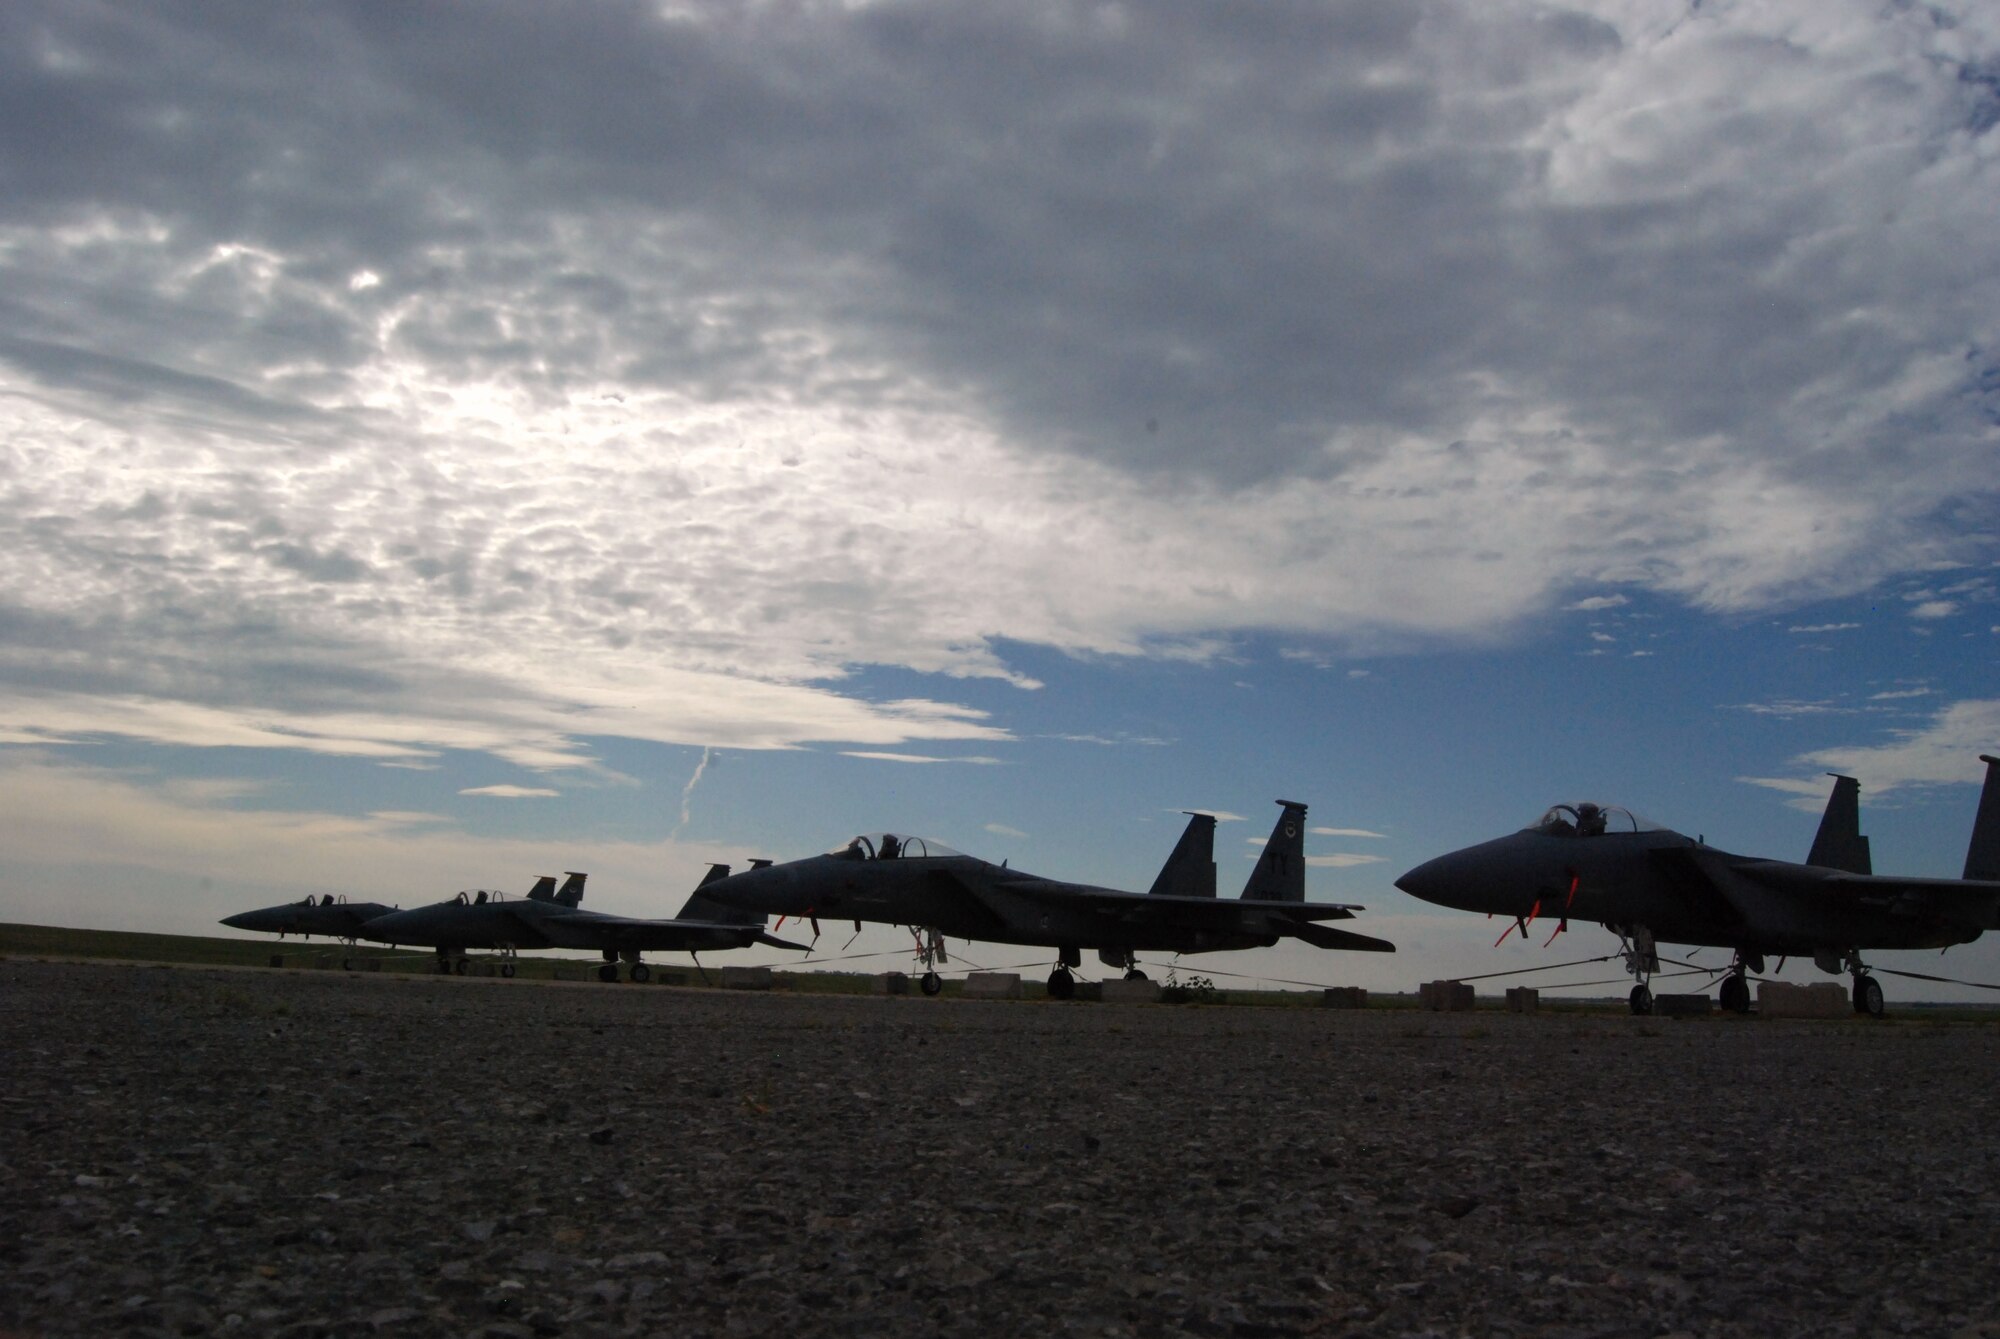 A series of F-15Cs are parked on the old Strategic Air Command ramp on Sheppard Air Force Base, Texas, July 23 after being altered to serve as a trainer for the 82nd Training Group and 782nd TRG F-15 courses. Sheppard acquired a total of 13 F-15s which were converted into trainers to update F-15 maintenance courses that used F-15A and F-15B models, which do not match the models currently used on operational flightlines.  (U.S. Air Force photo/Tech. Sgt. Vernon Cunningham)